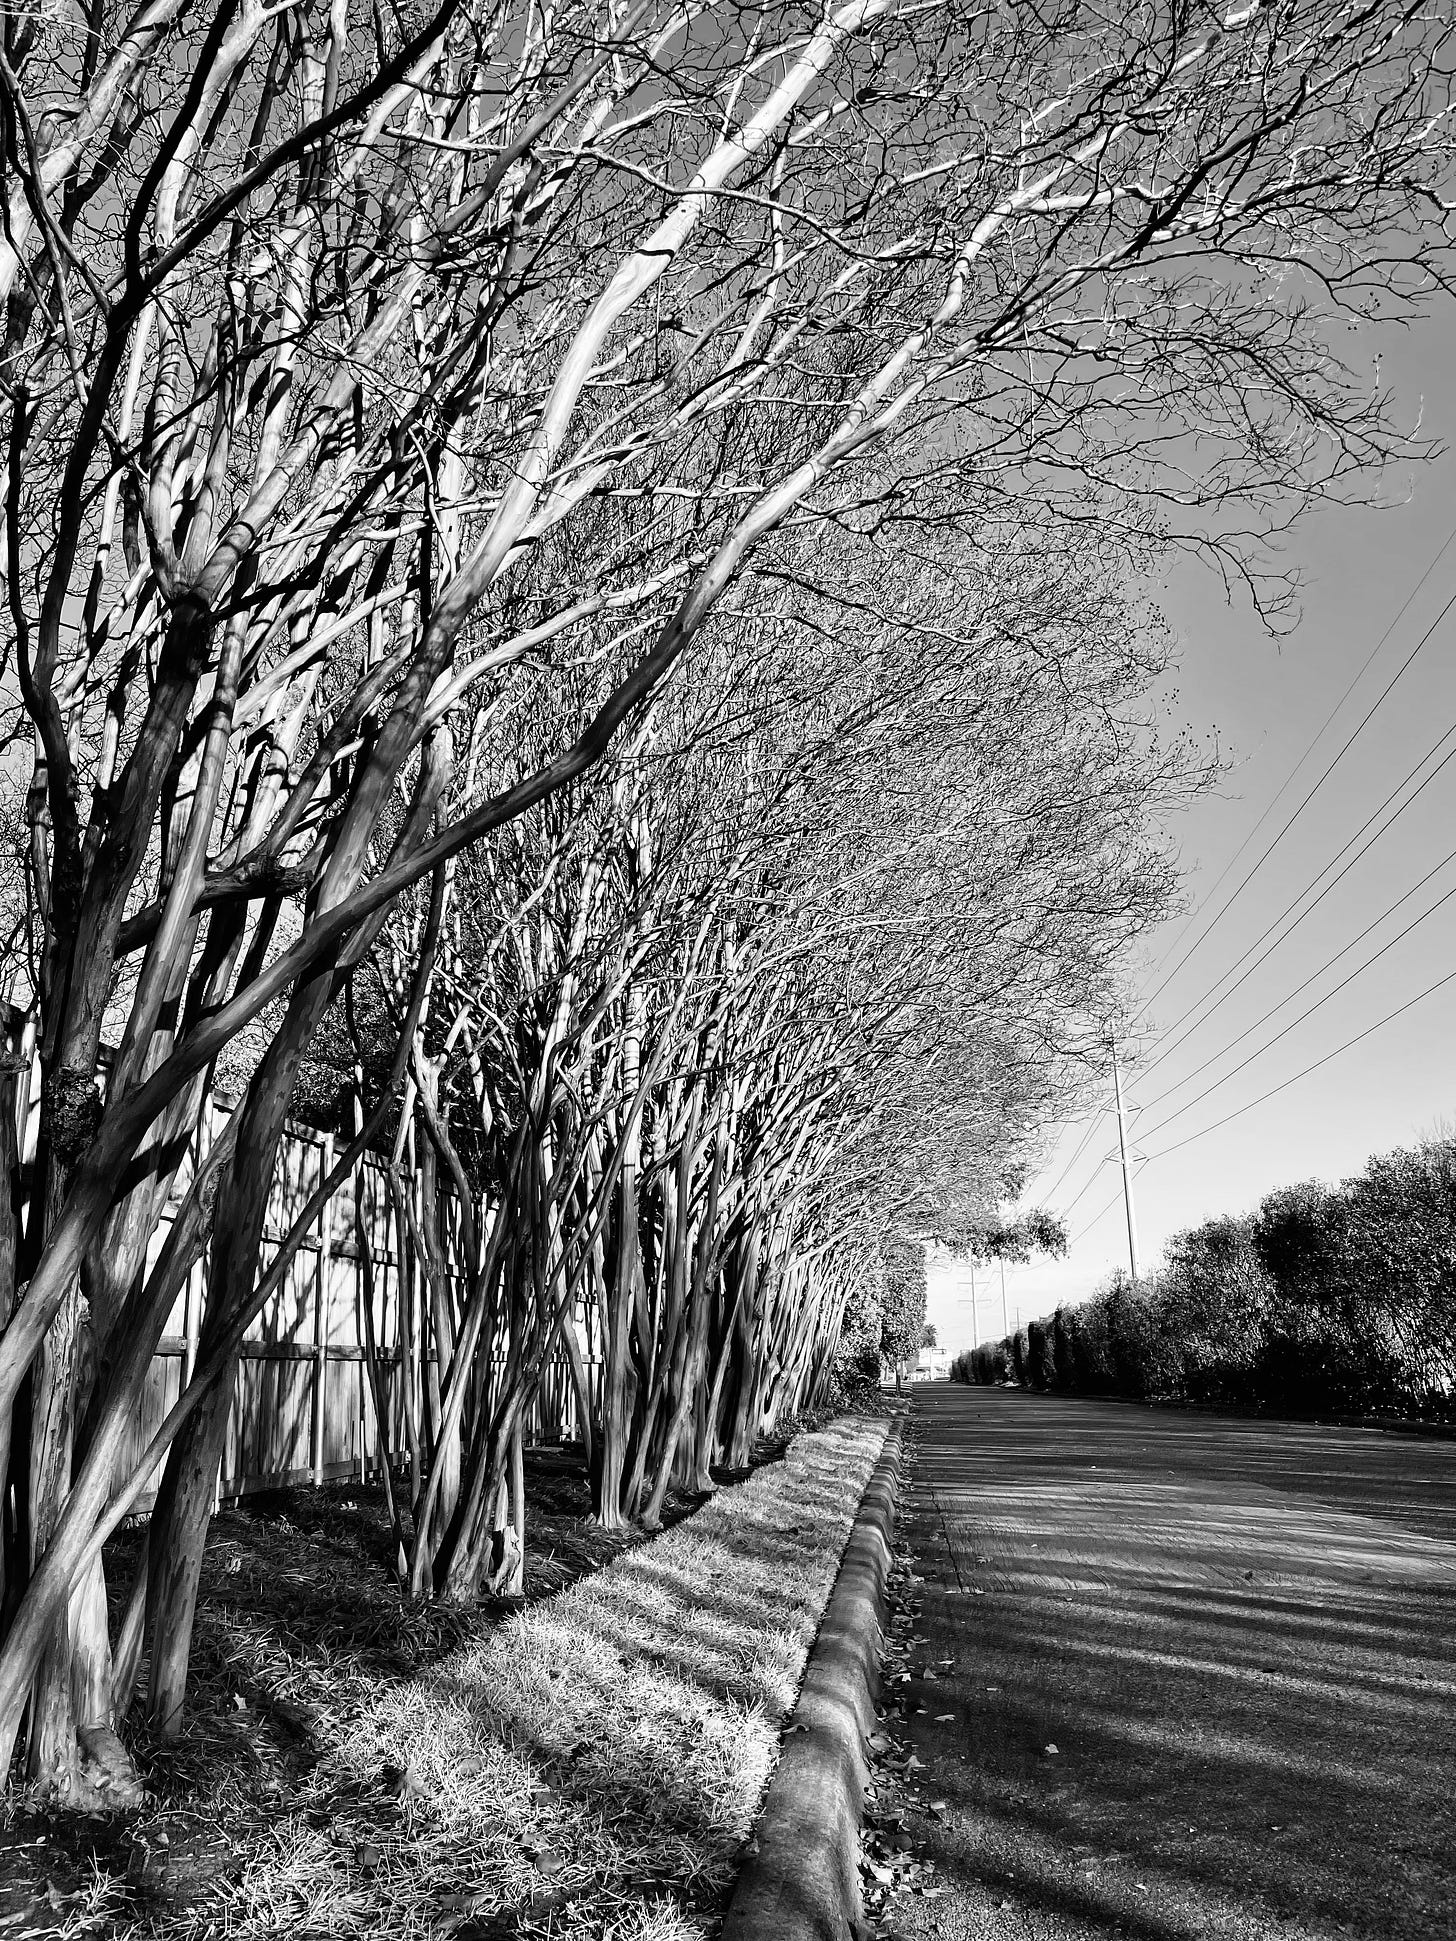 A black-and-white photograph of a row of crepe myrtle trees planted inside a curb that runs along a residential street